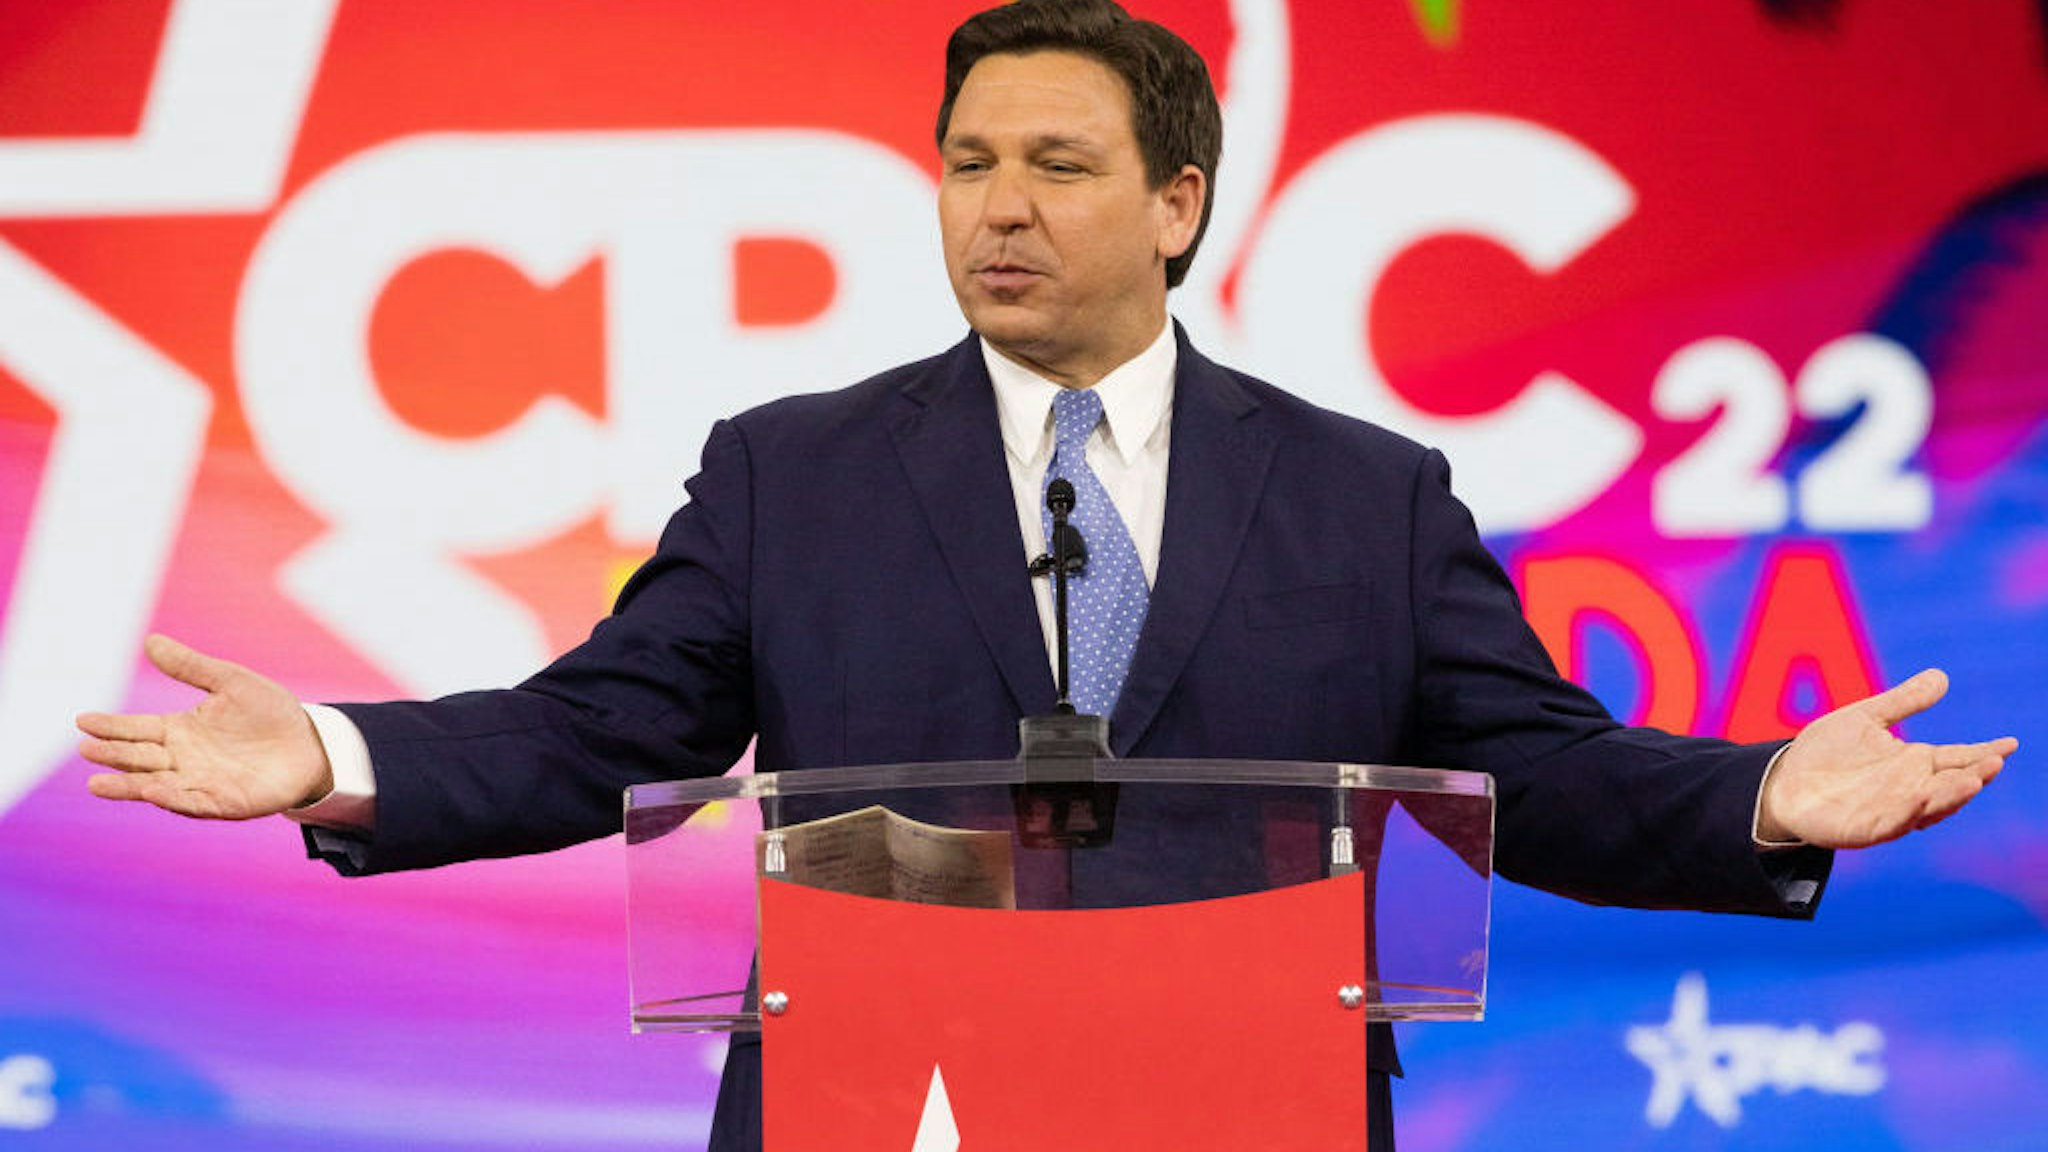 Ron DeSantis, governor of Florida, speaks during the Conservative Political Action Conference (CPAC) in Orlando, Florida, U.S., on Thursday, Feb. 24, 2022. Launched in 1974, the Conservative Political Action Conference is the largest gathering of conservatives in the world. Photographer: Tristan Wheelock/Bloomberg